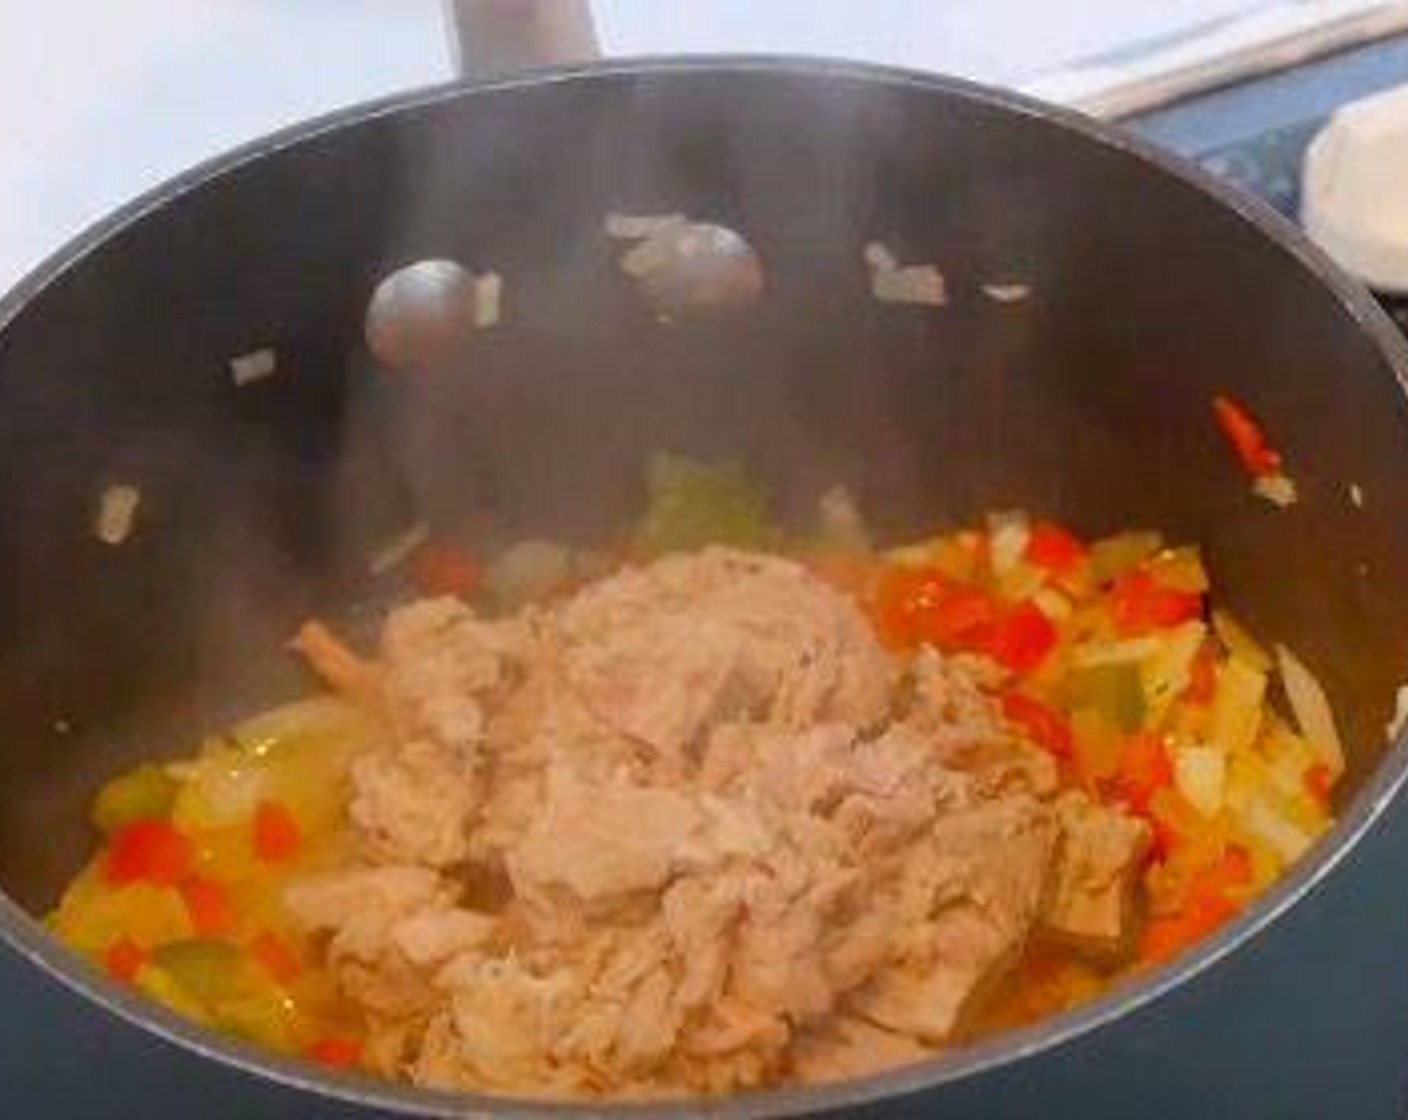 step 3 When the vegetables are soft, add the Canned Tuna (1 cup) and leave to cook for 10 to 15 minutes then leave to cool.